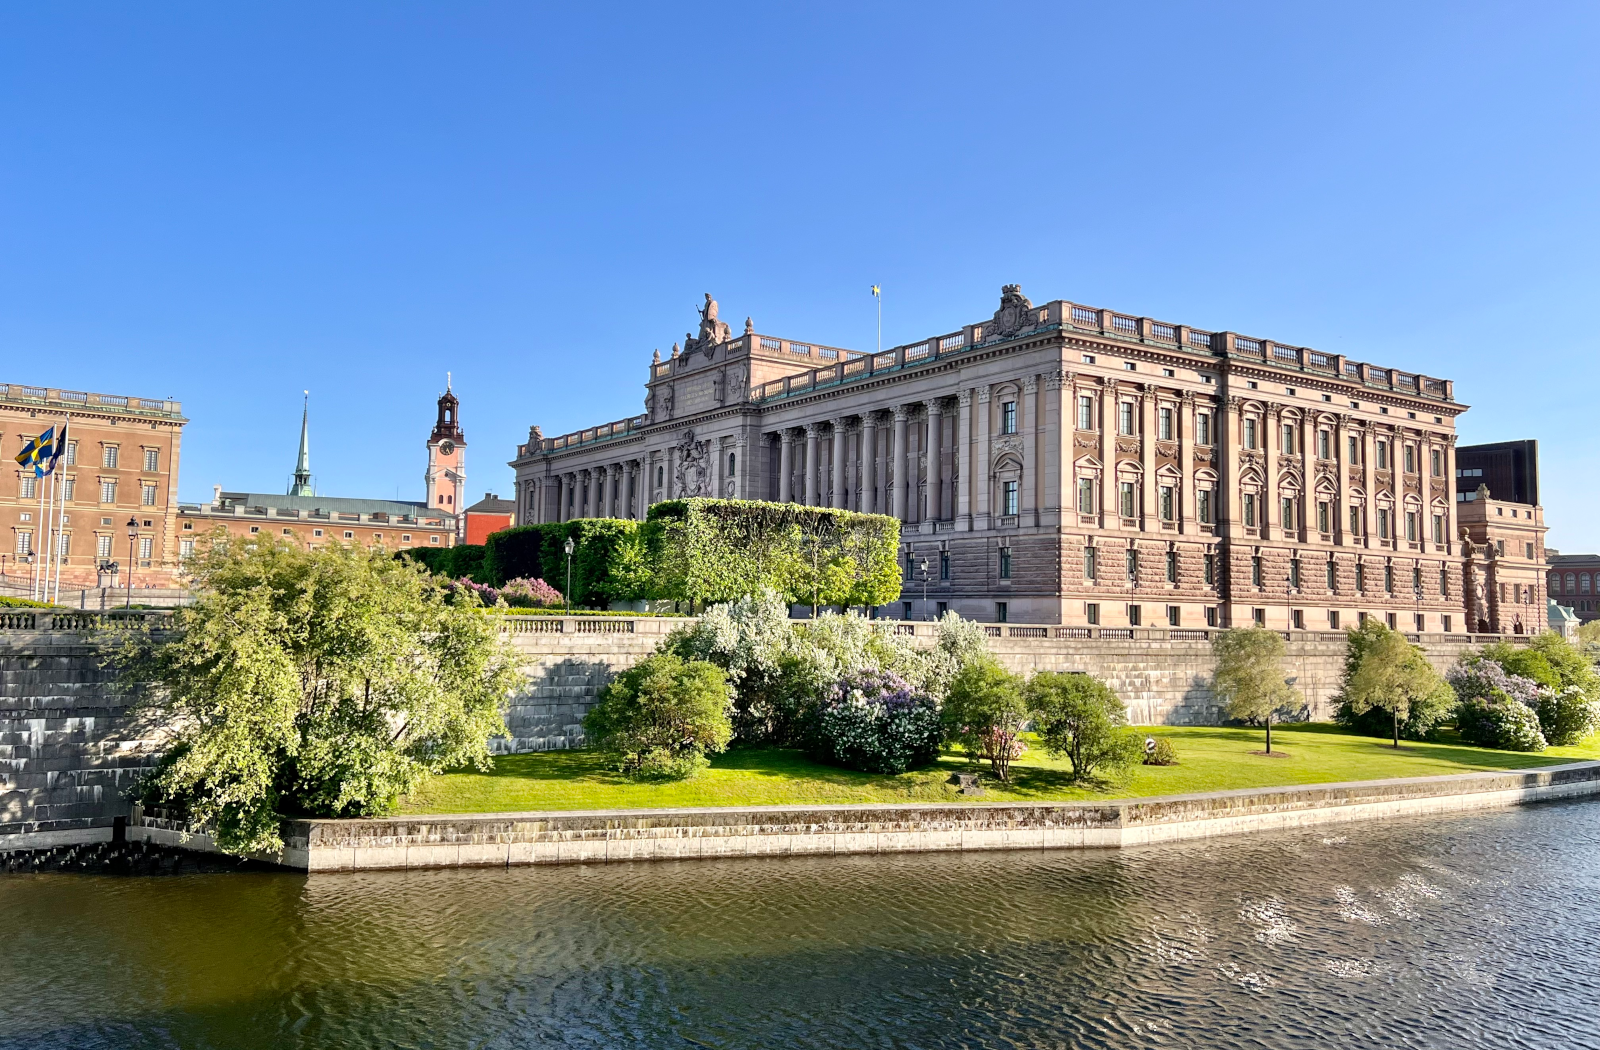 Stockholm's must-see parks and gardens